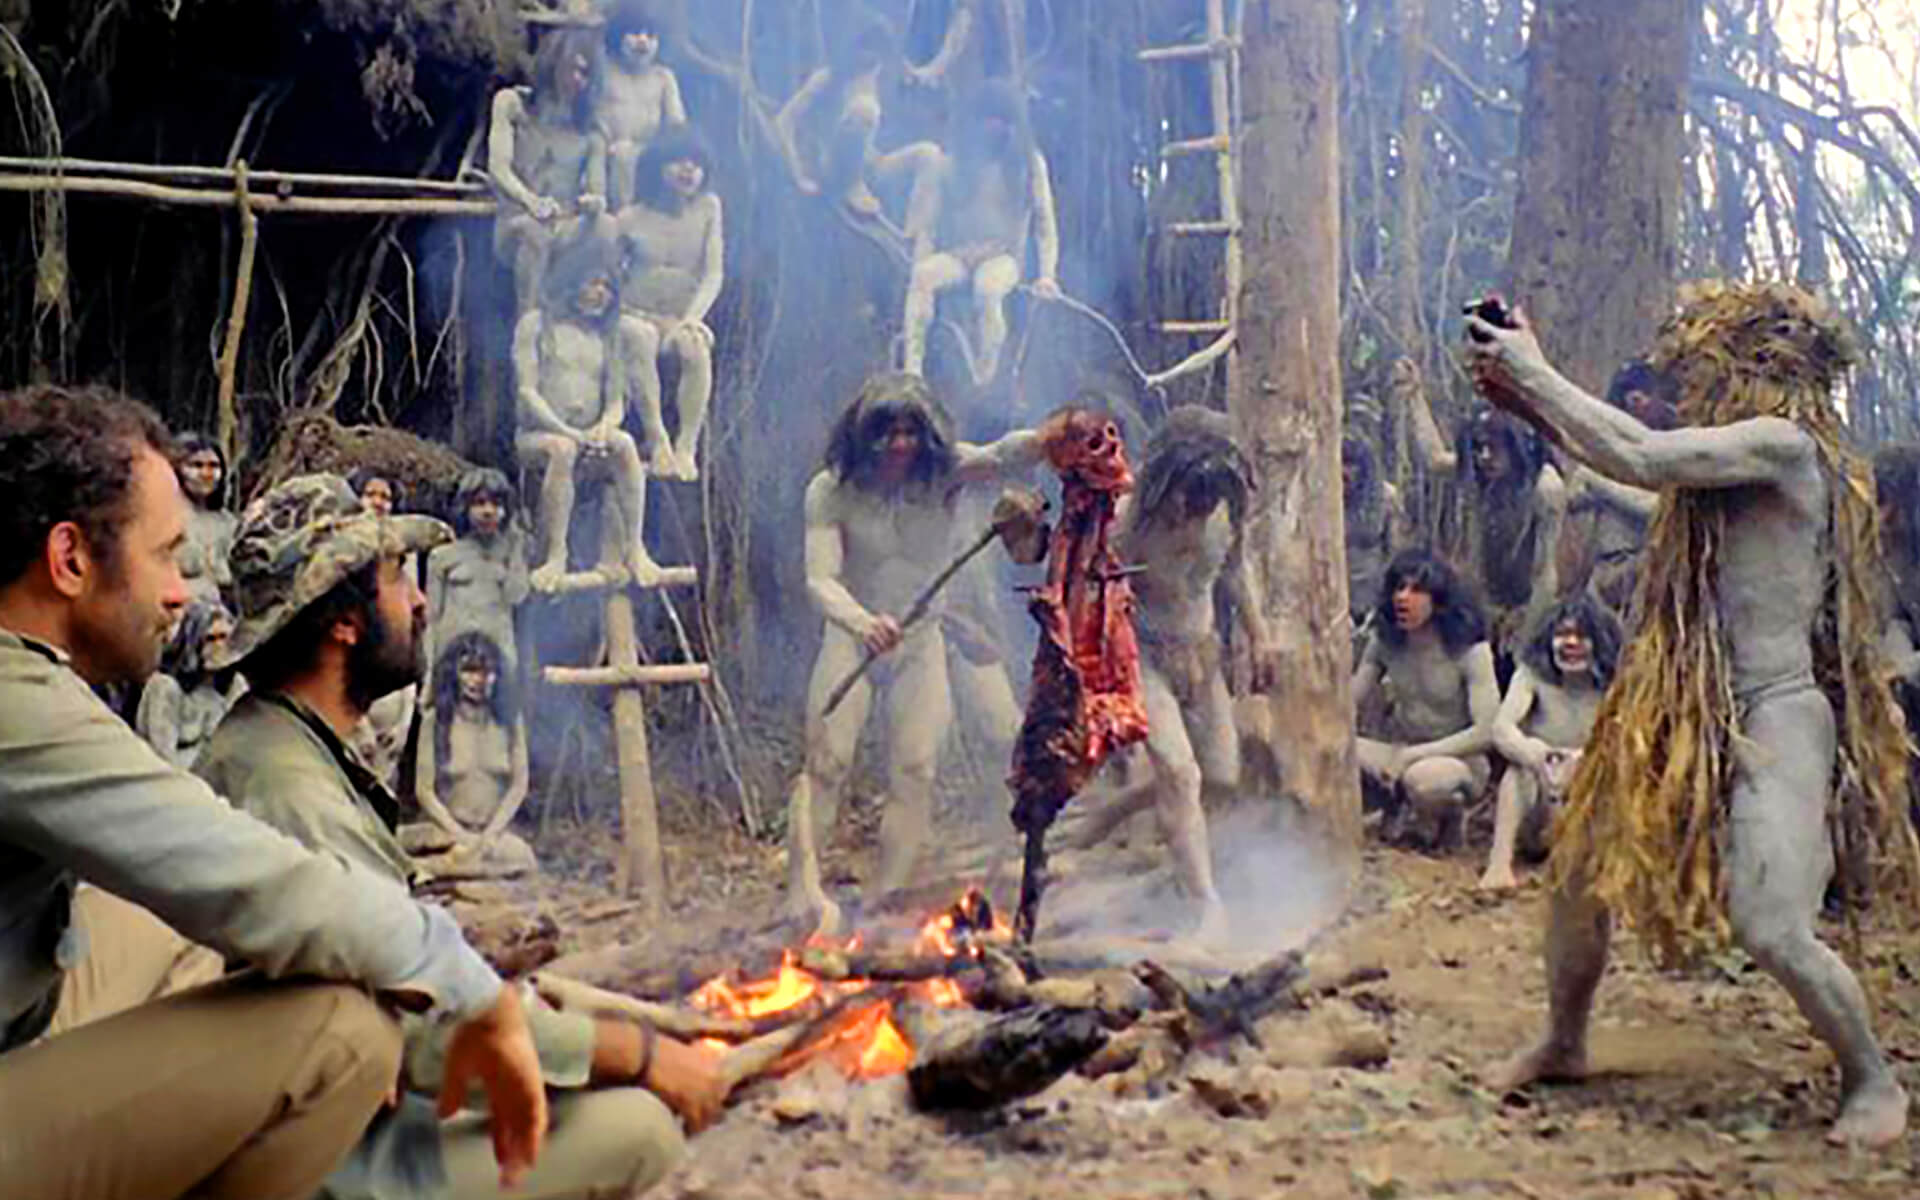 CANNIBAL HOLOCAUST. The most brutal movie ever filmed